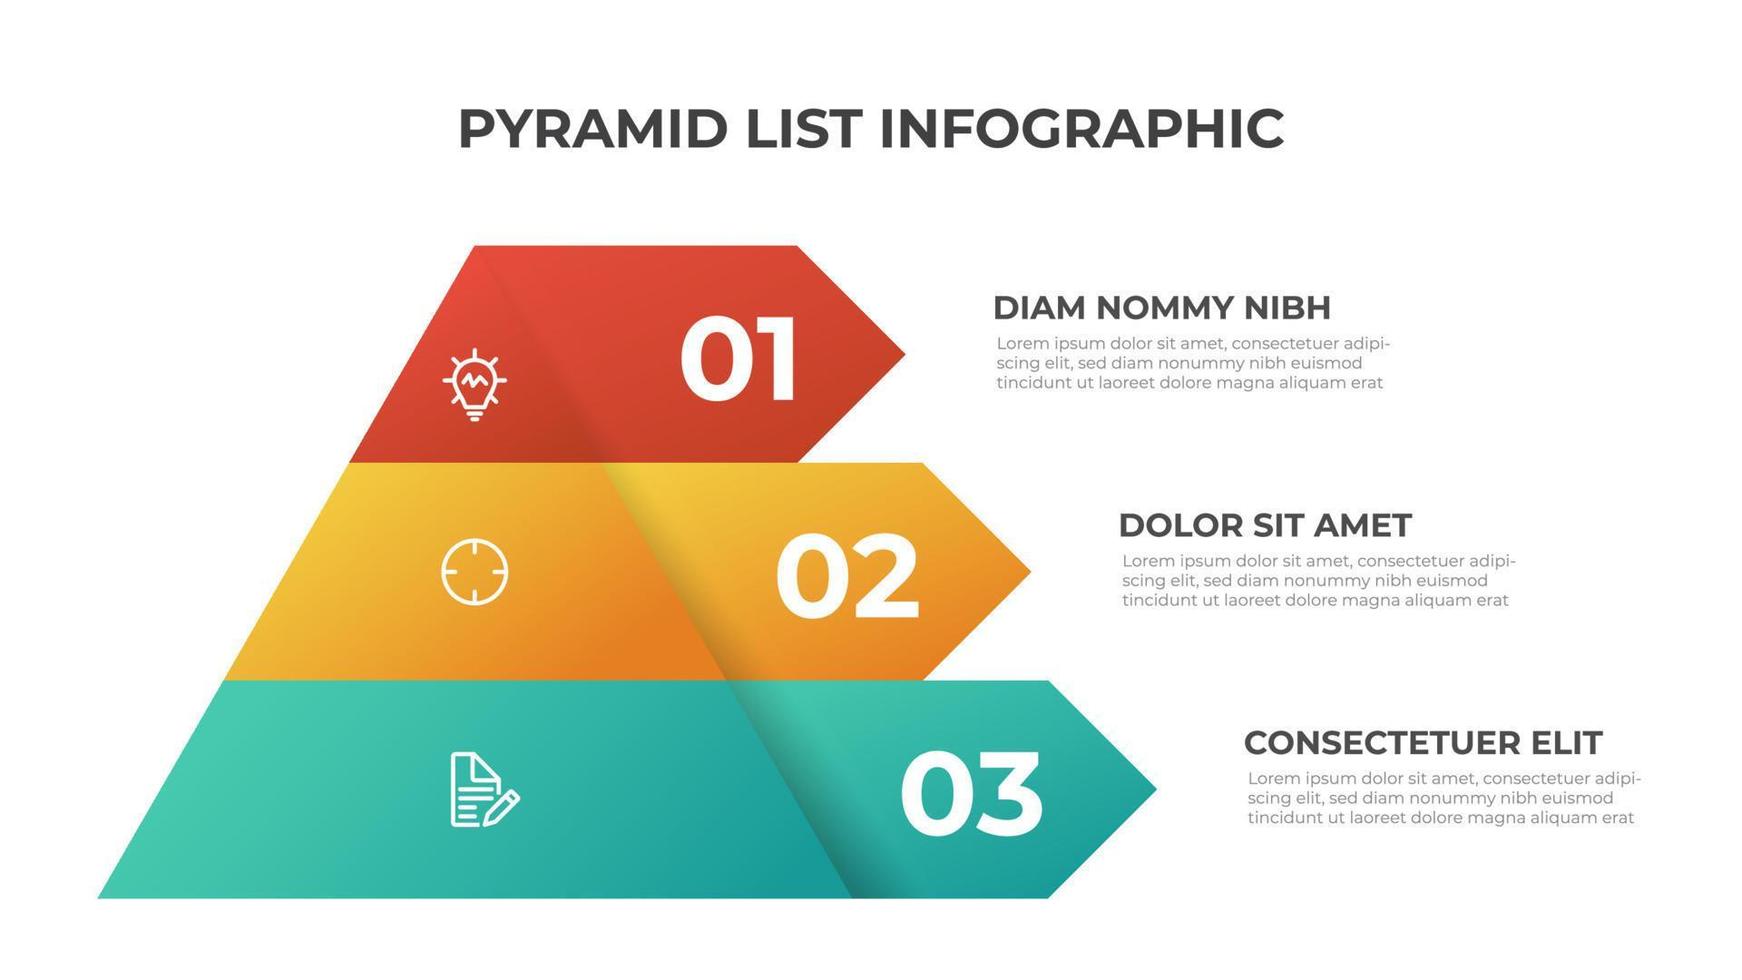 Pyramid infographic template vector with 3 list, layers, options, steps. Layout element for presentation, report, banner, etc.